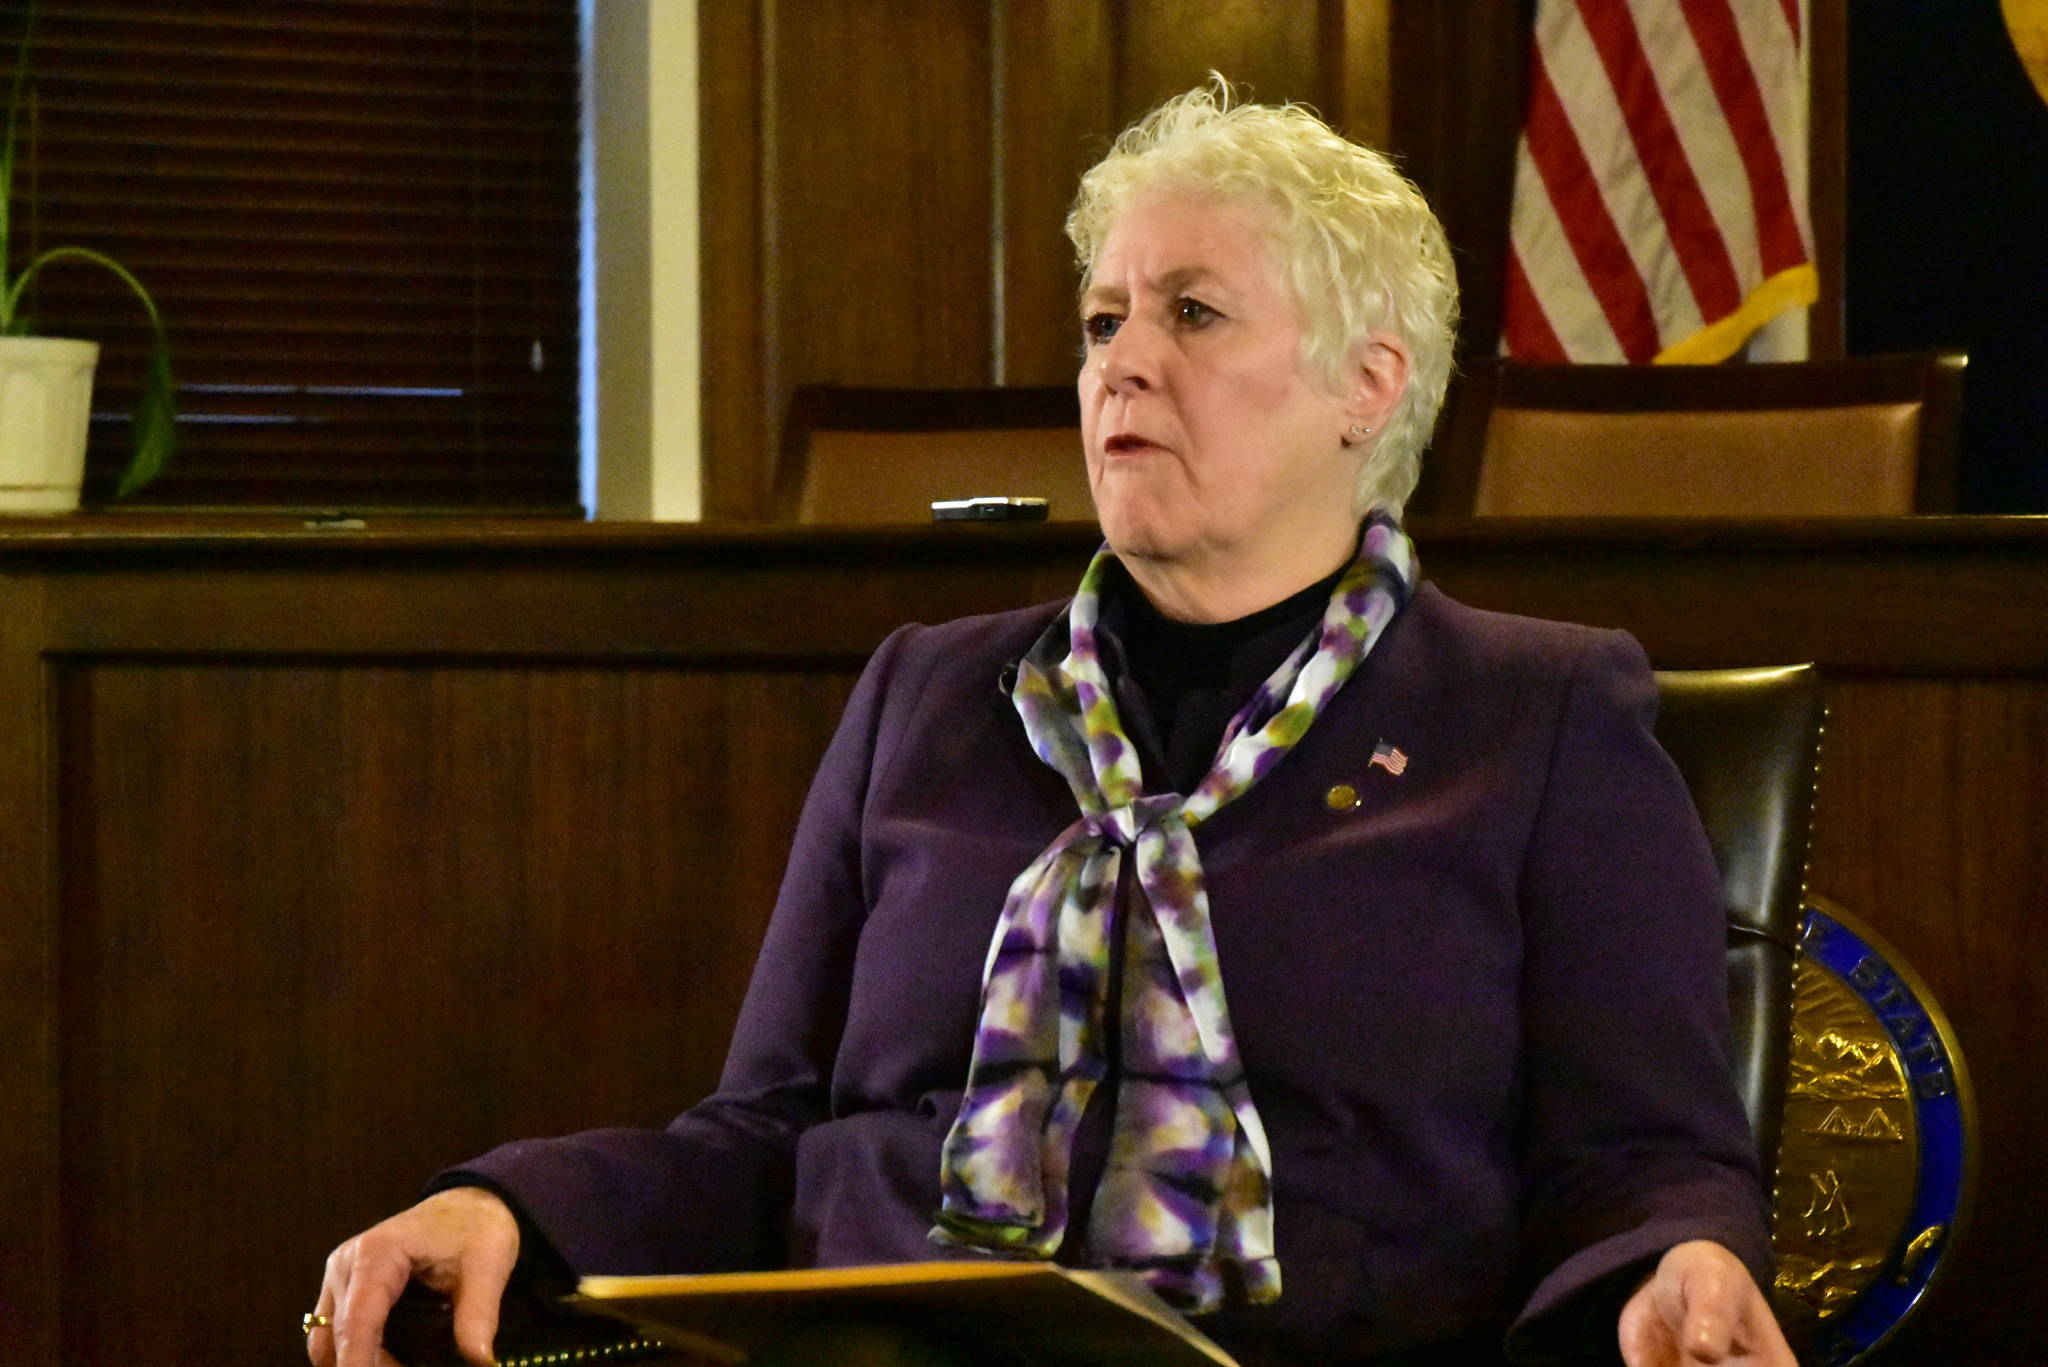 Rep. Louise Stutes, R-Kodiak, meets with reporters in the House Speakers Chambers at the Alaska State Capitol on Monday, Mar. 2, 2020. (Peter Segall | Juneau Empire)